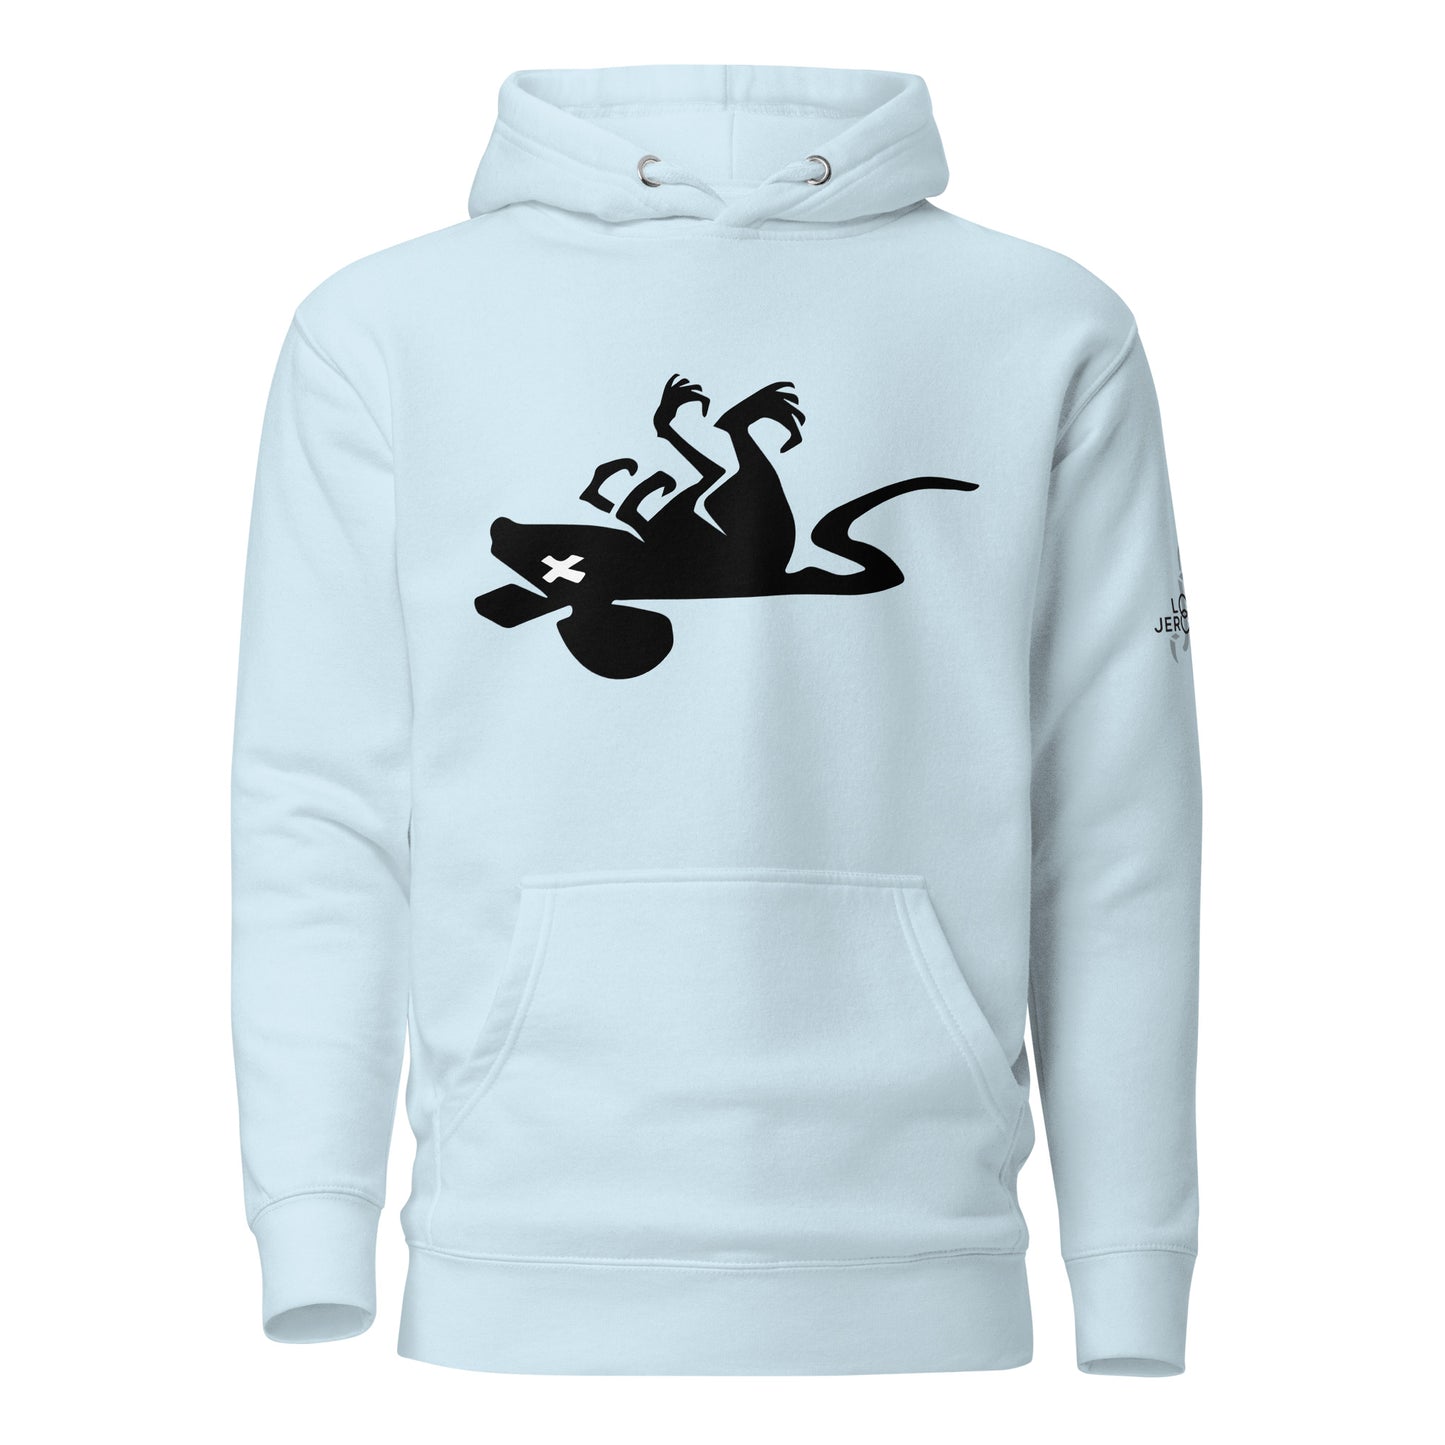 DESTINED TO BE DEADLY - Unisex Hoodie